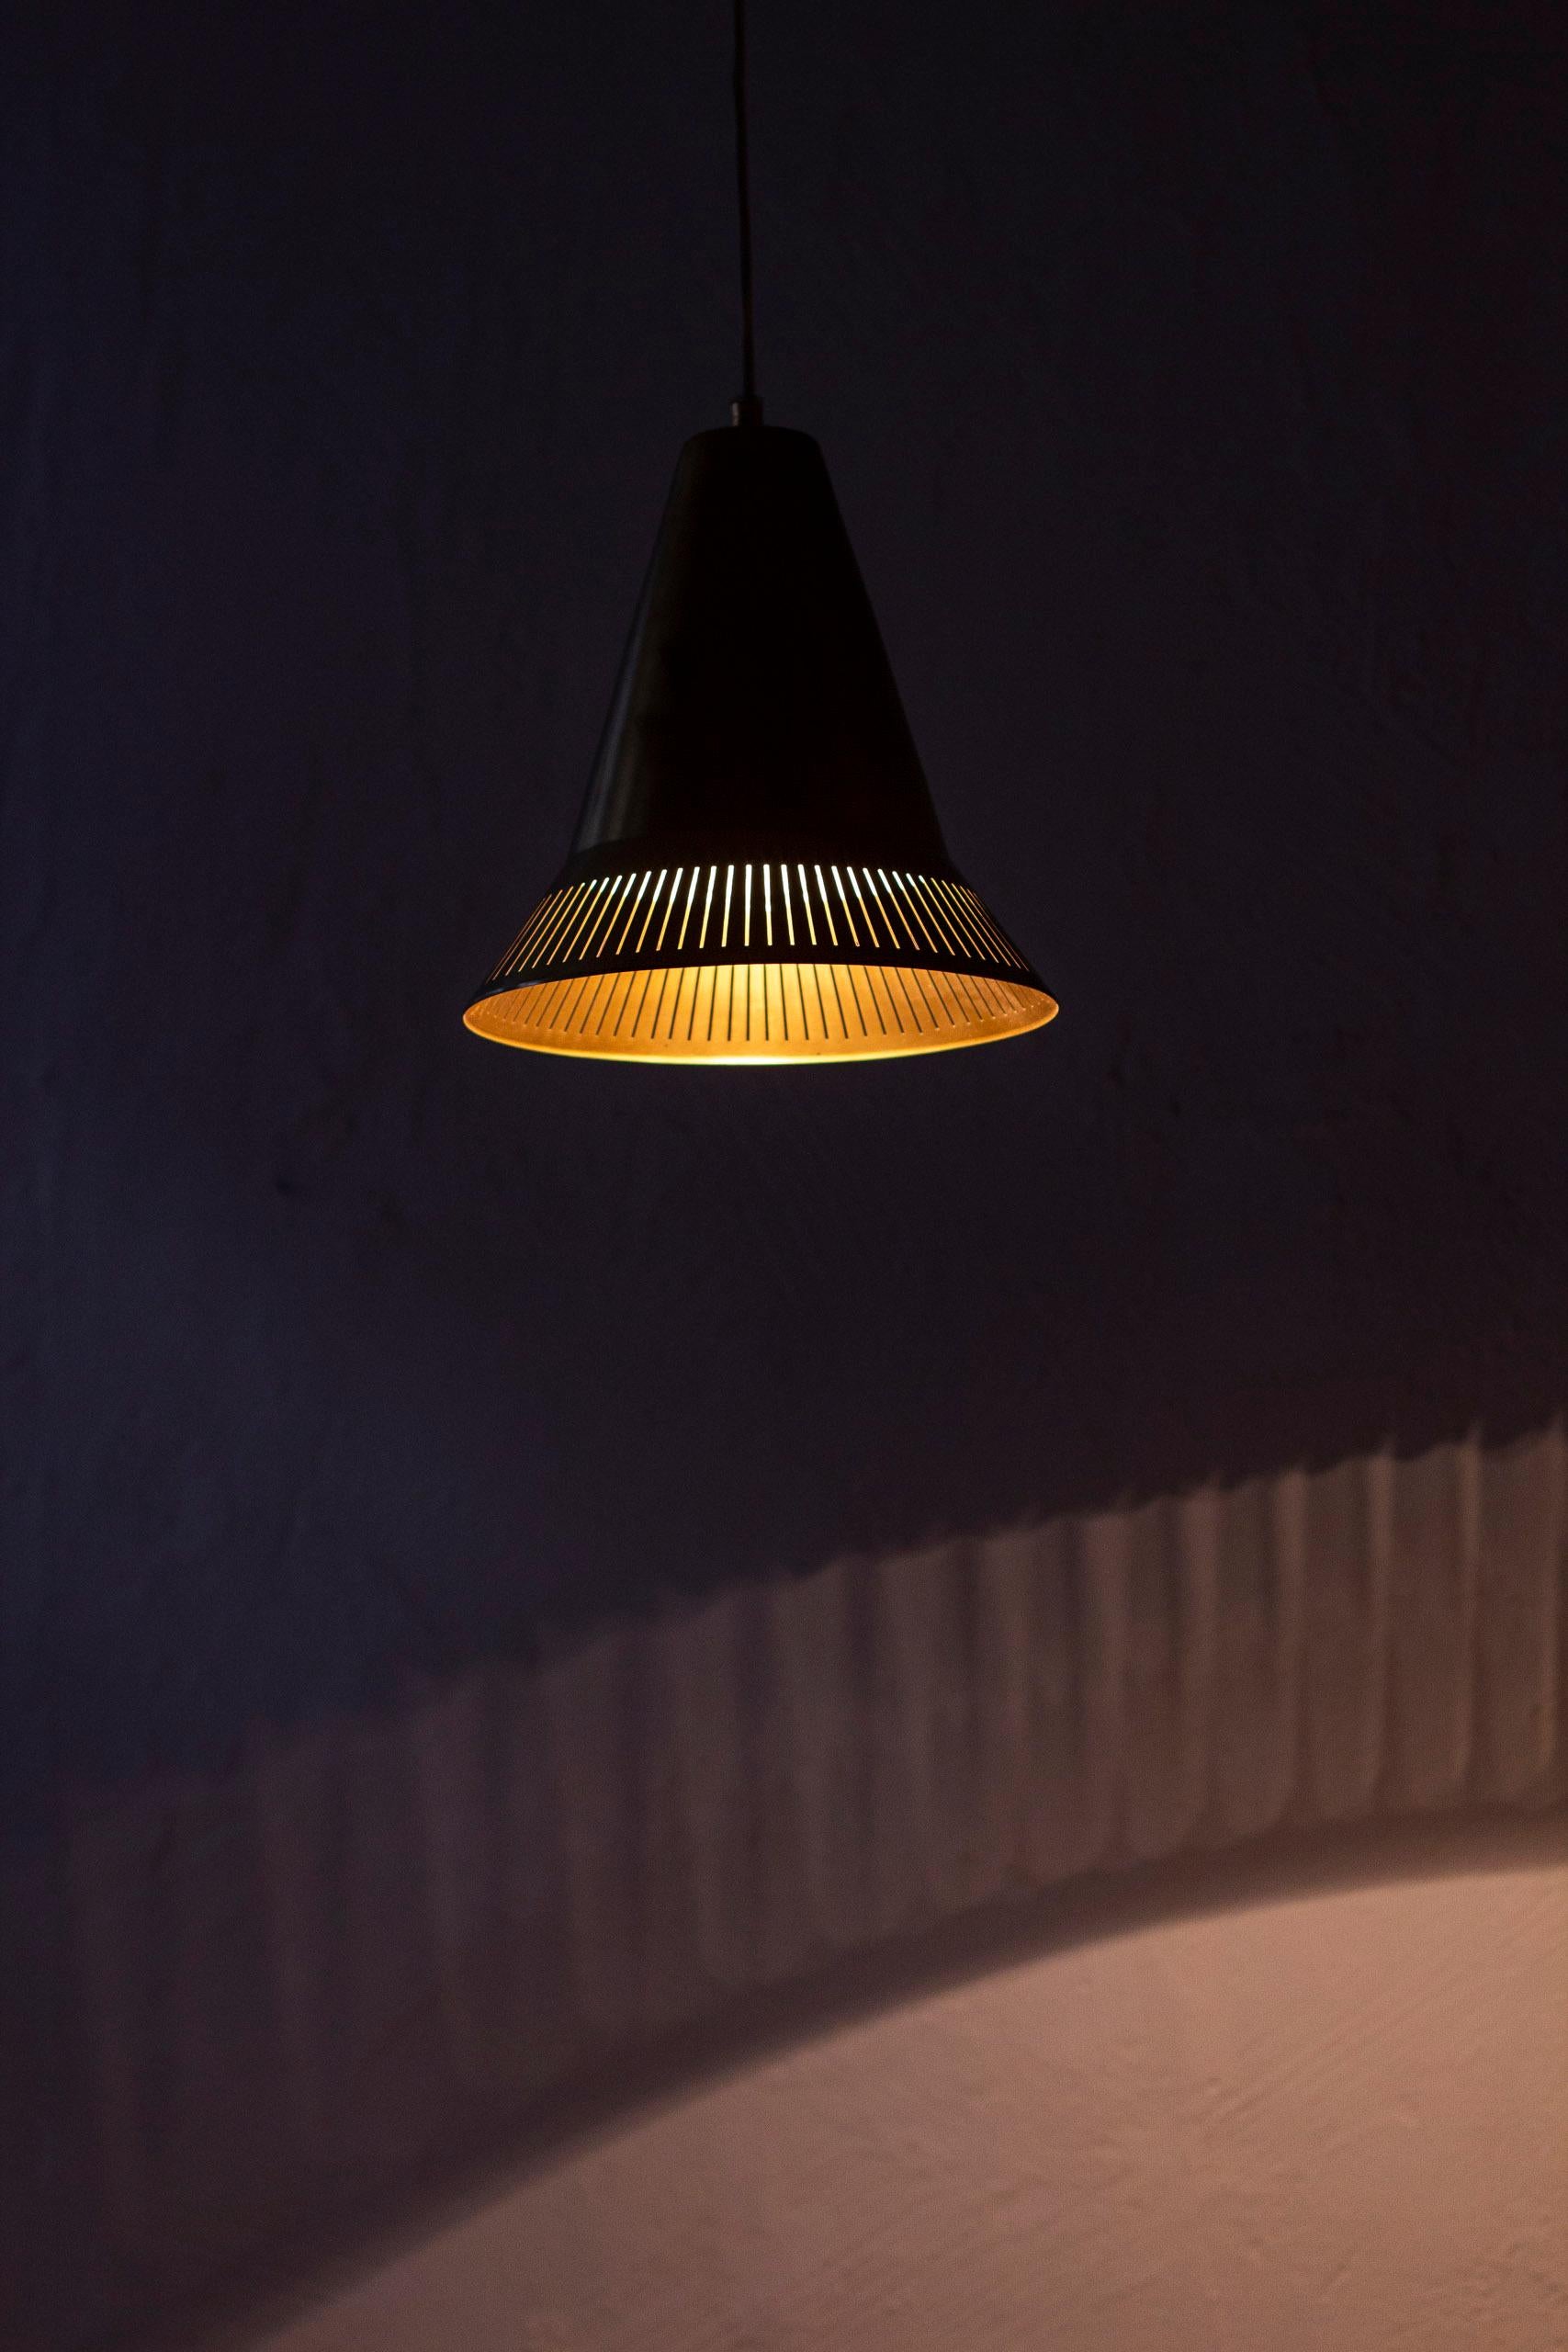 Pendant light model 100 designed by Hans Bergström. Produced by Ateljé Lyktan during the 1950s. Made from polished brass with white lacquered inside. Perforated edge and top creating a beautiful light when lit. Comes with original brass ceiling cup